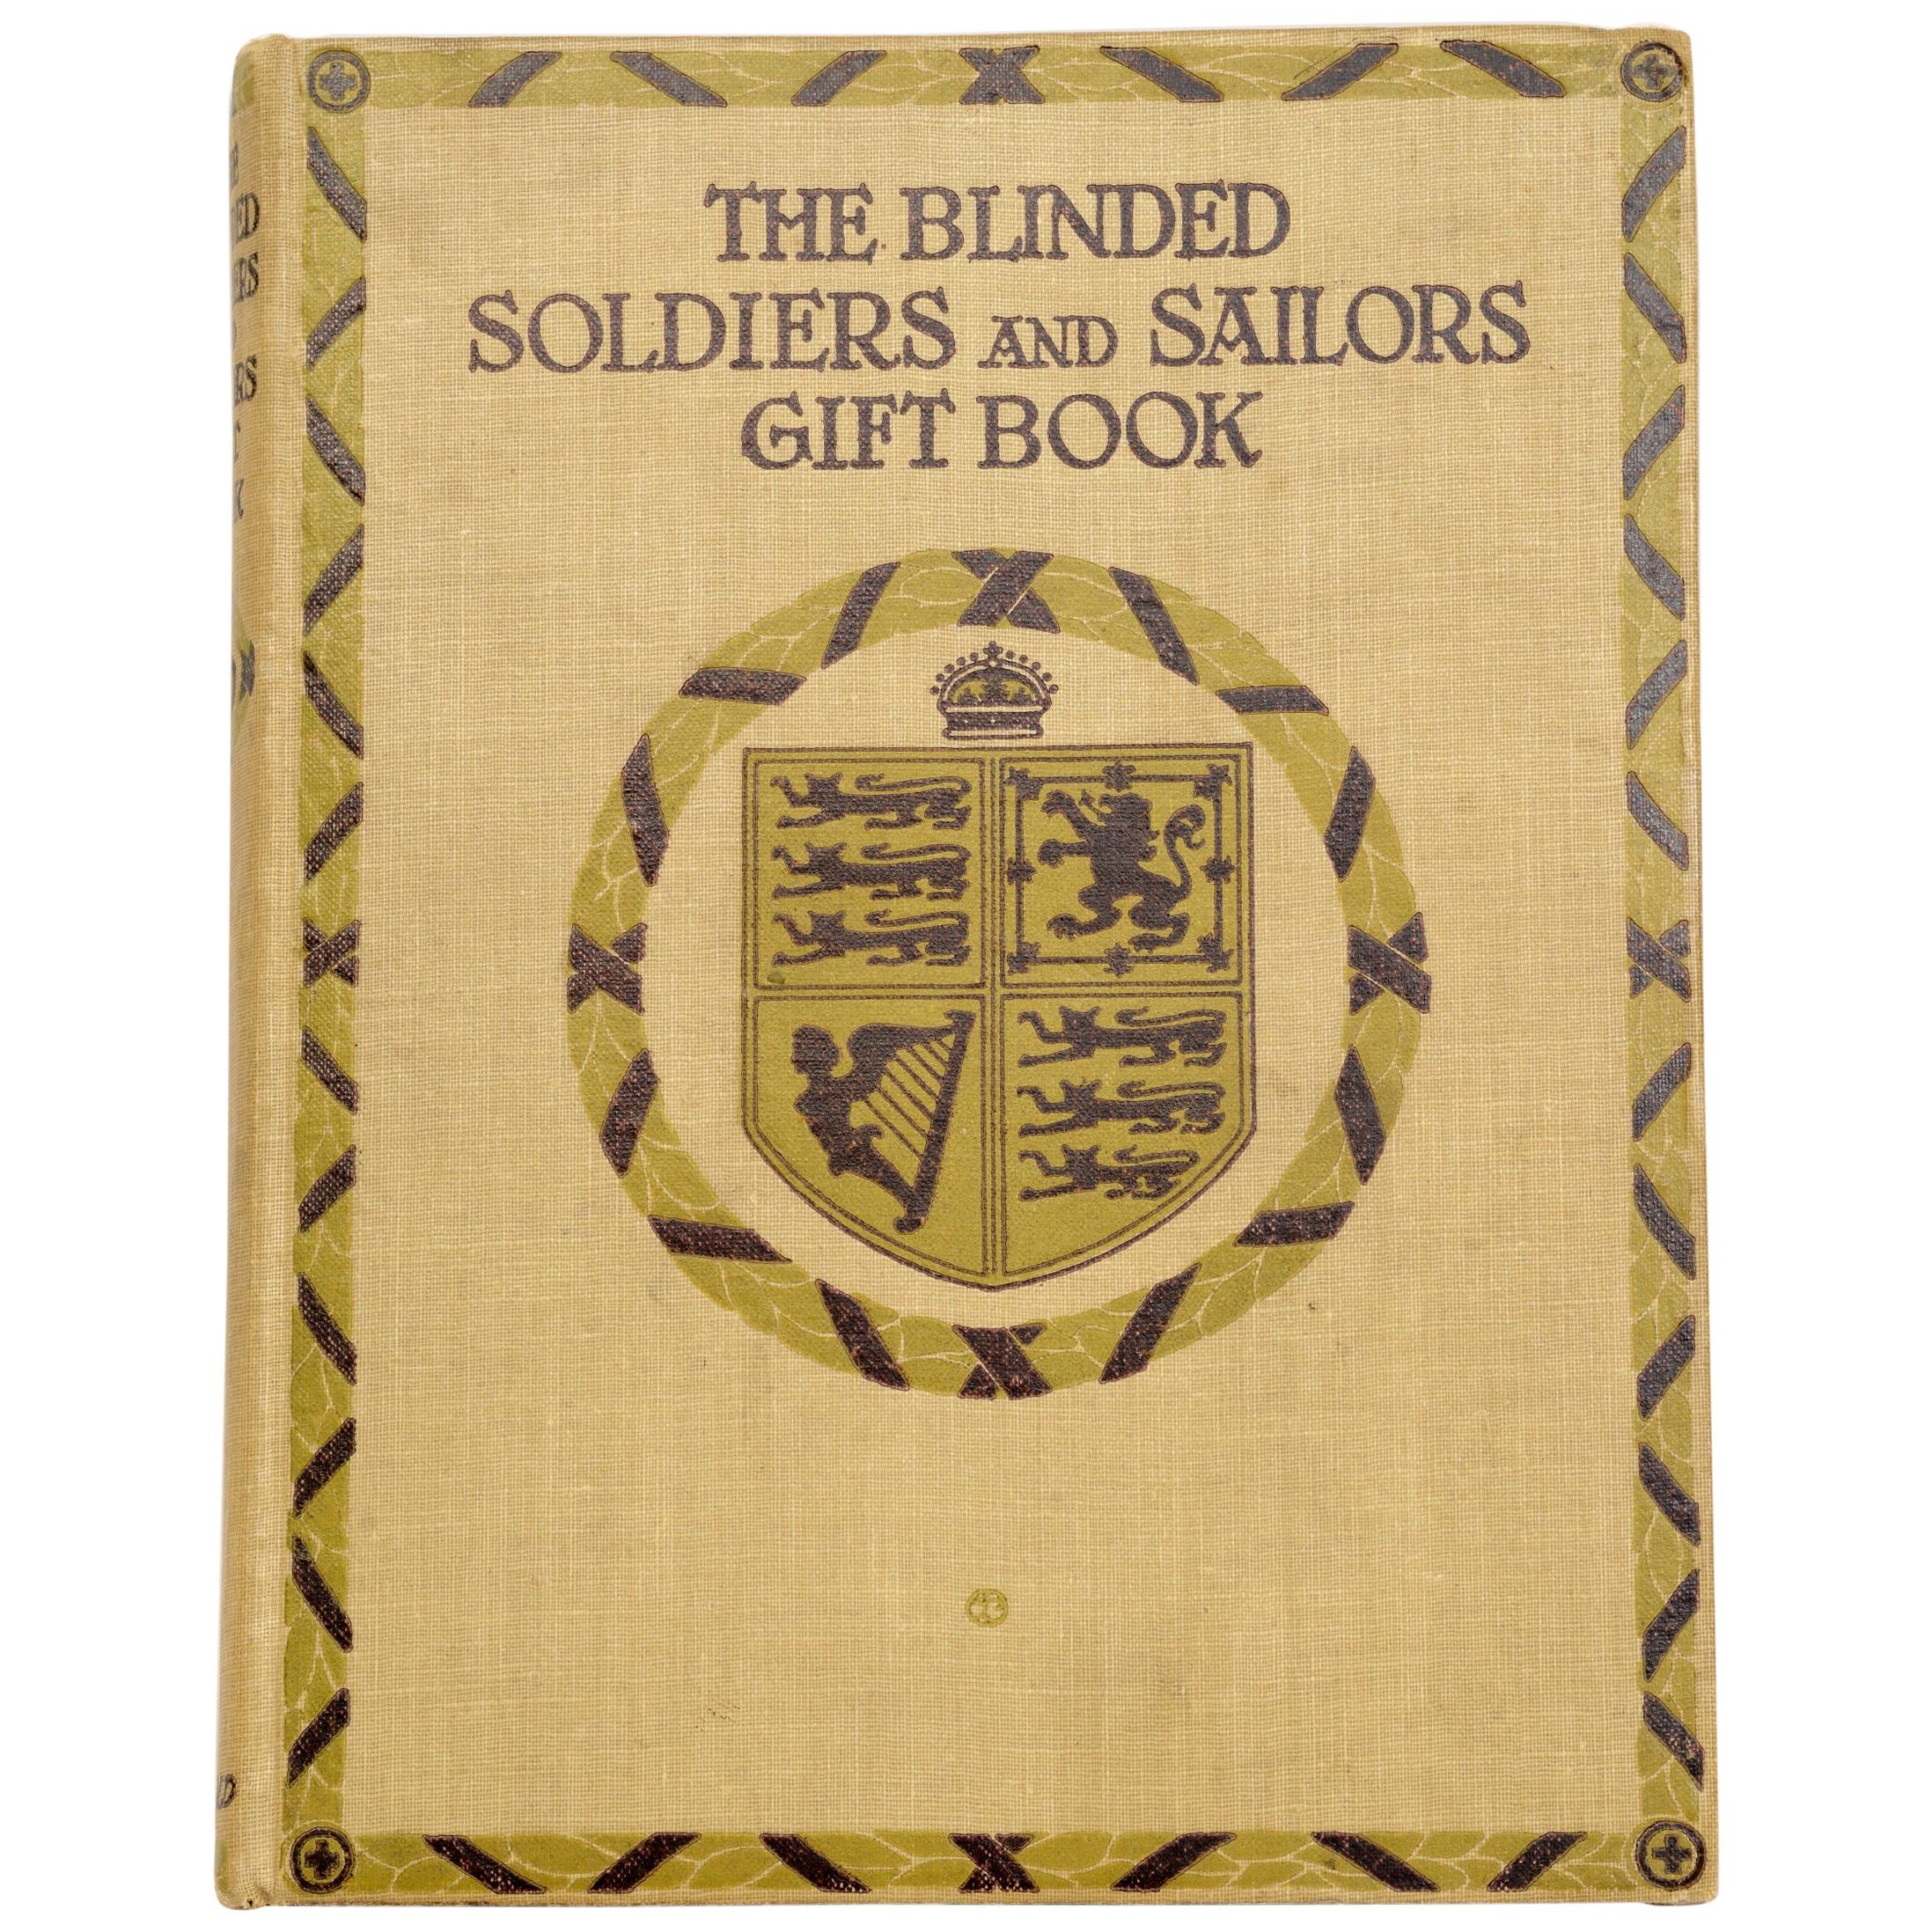 Blinded Sailors and Soldiers Gift Book by George Goodchild 1st Edition